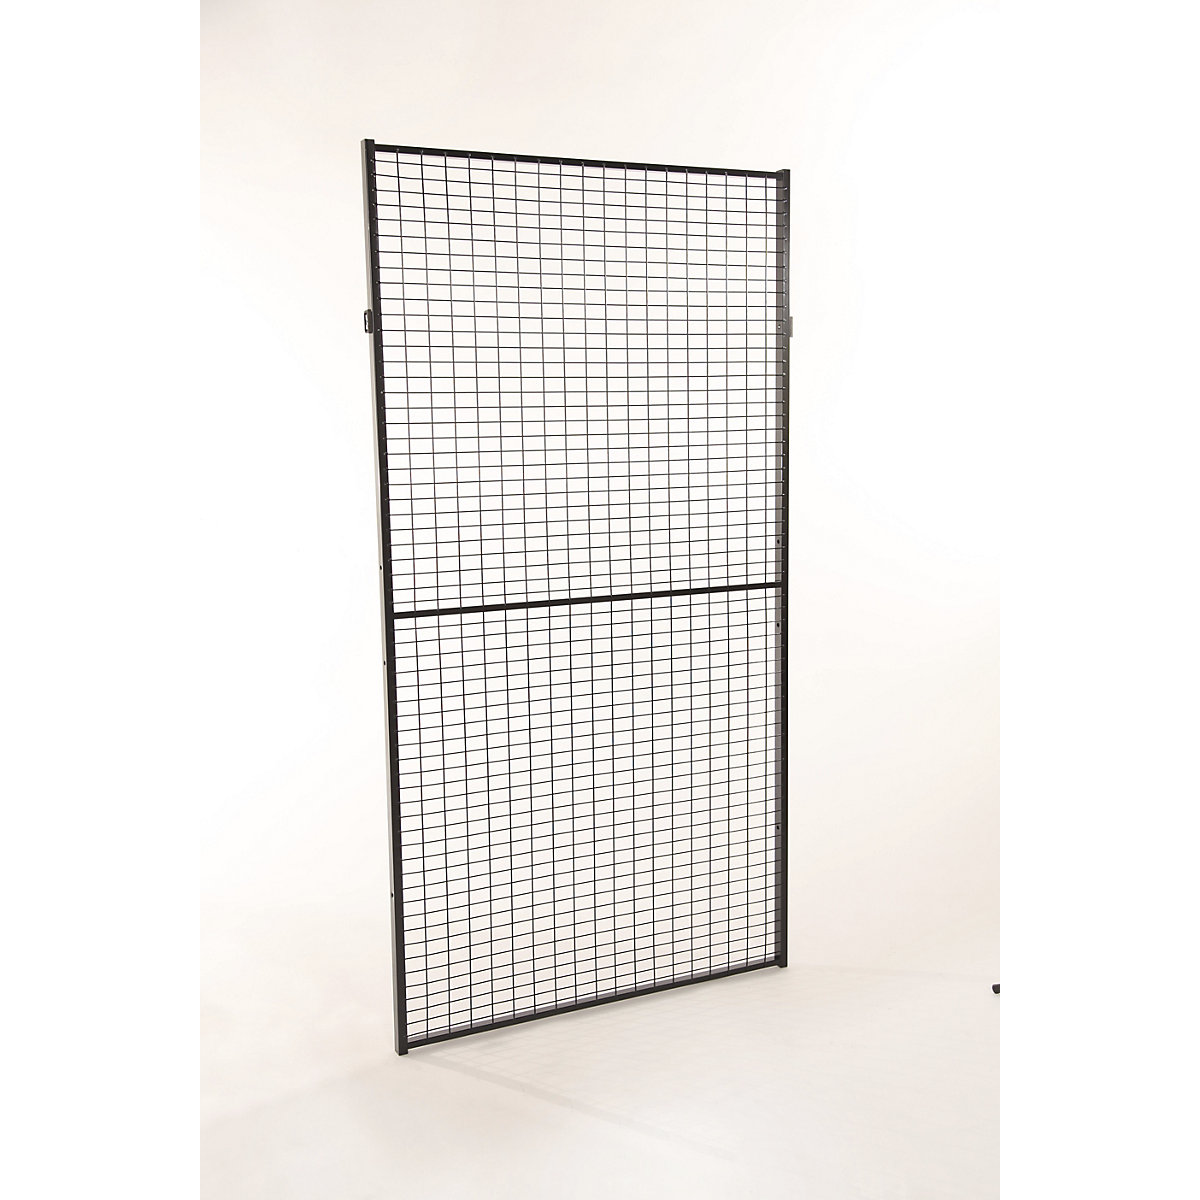 X-GUARD CLASSIC machine protective fencing, wall section – Axelent, height 2200 mm, width 900 mm-16